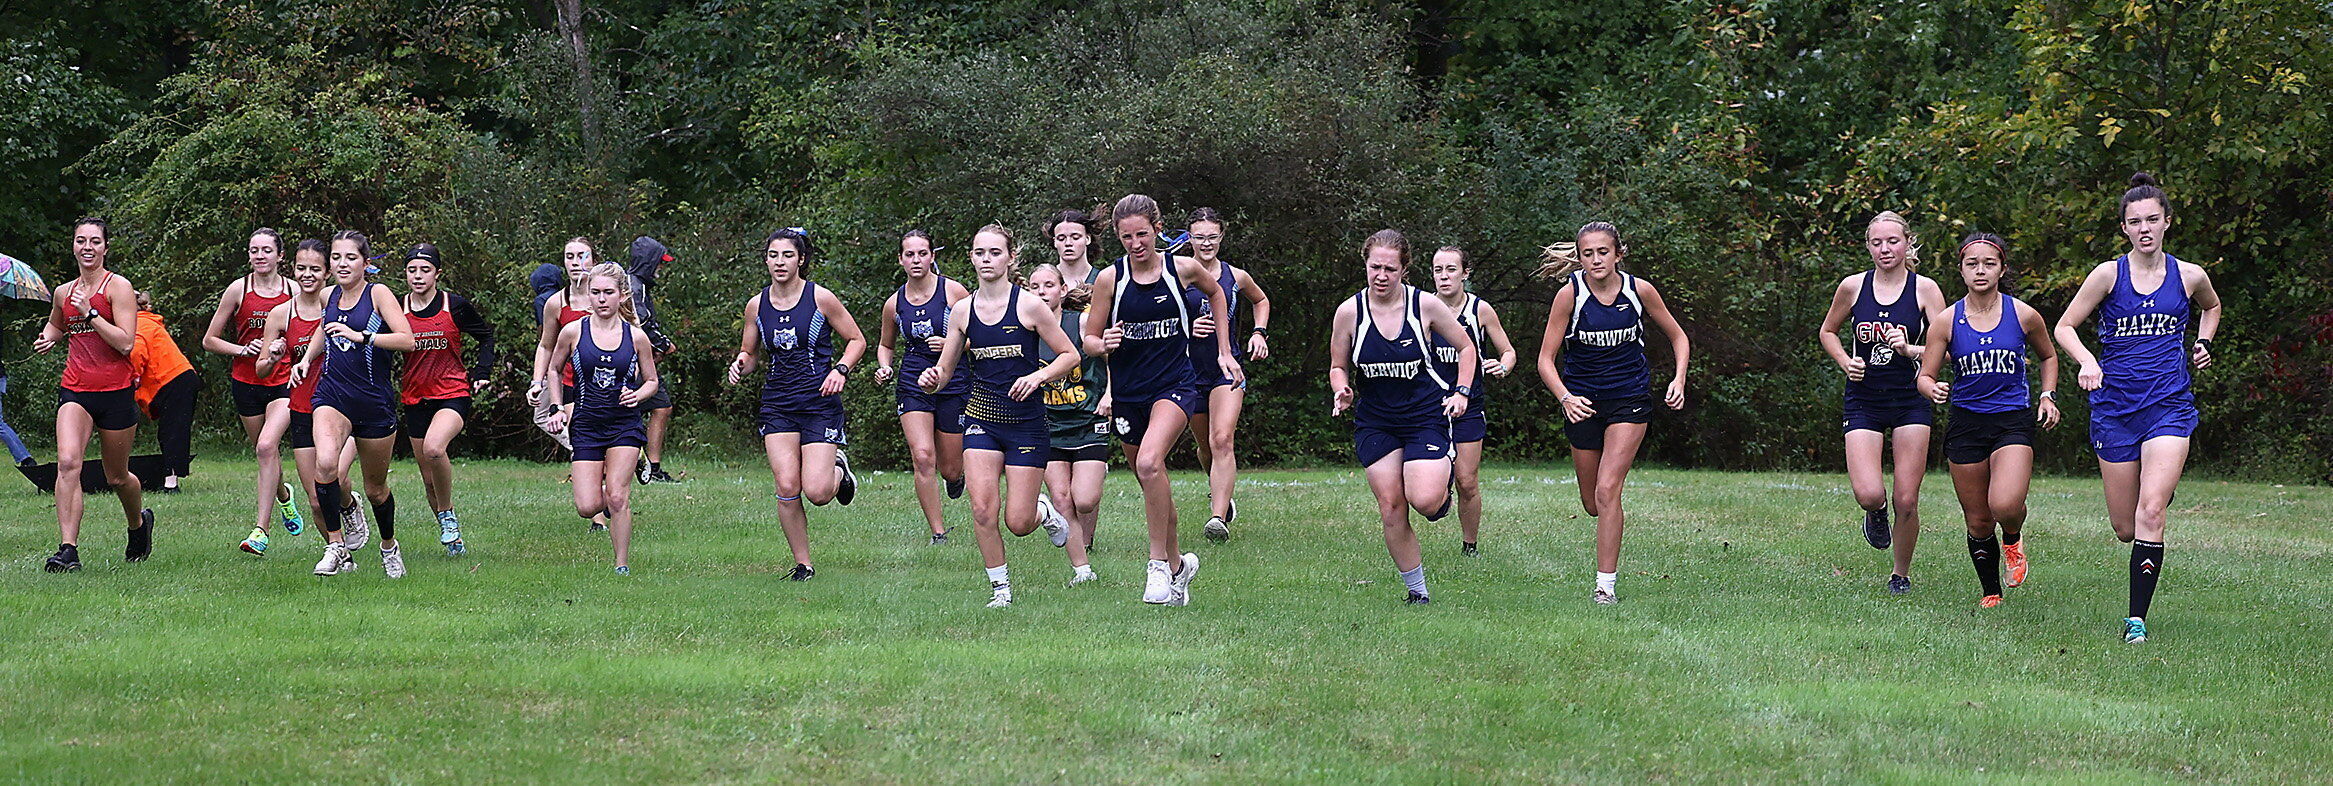 WVC CROSS COUNTRY: Novelli leads match, Sem on the course